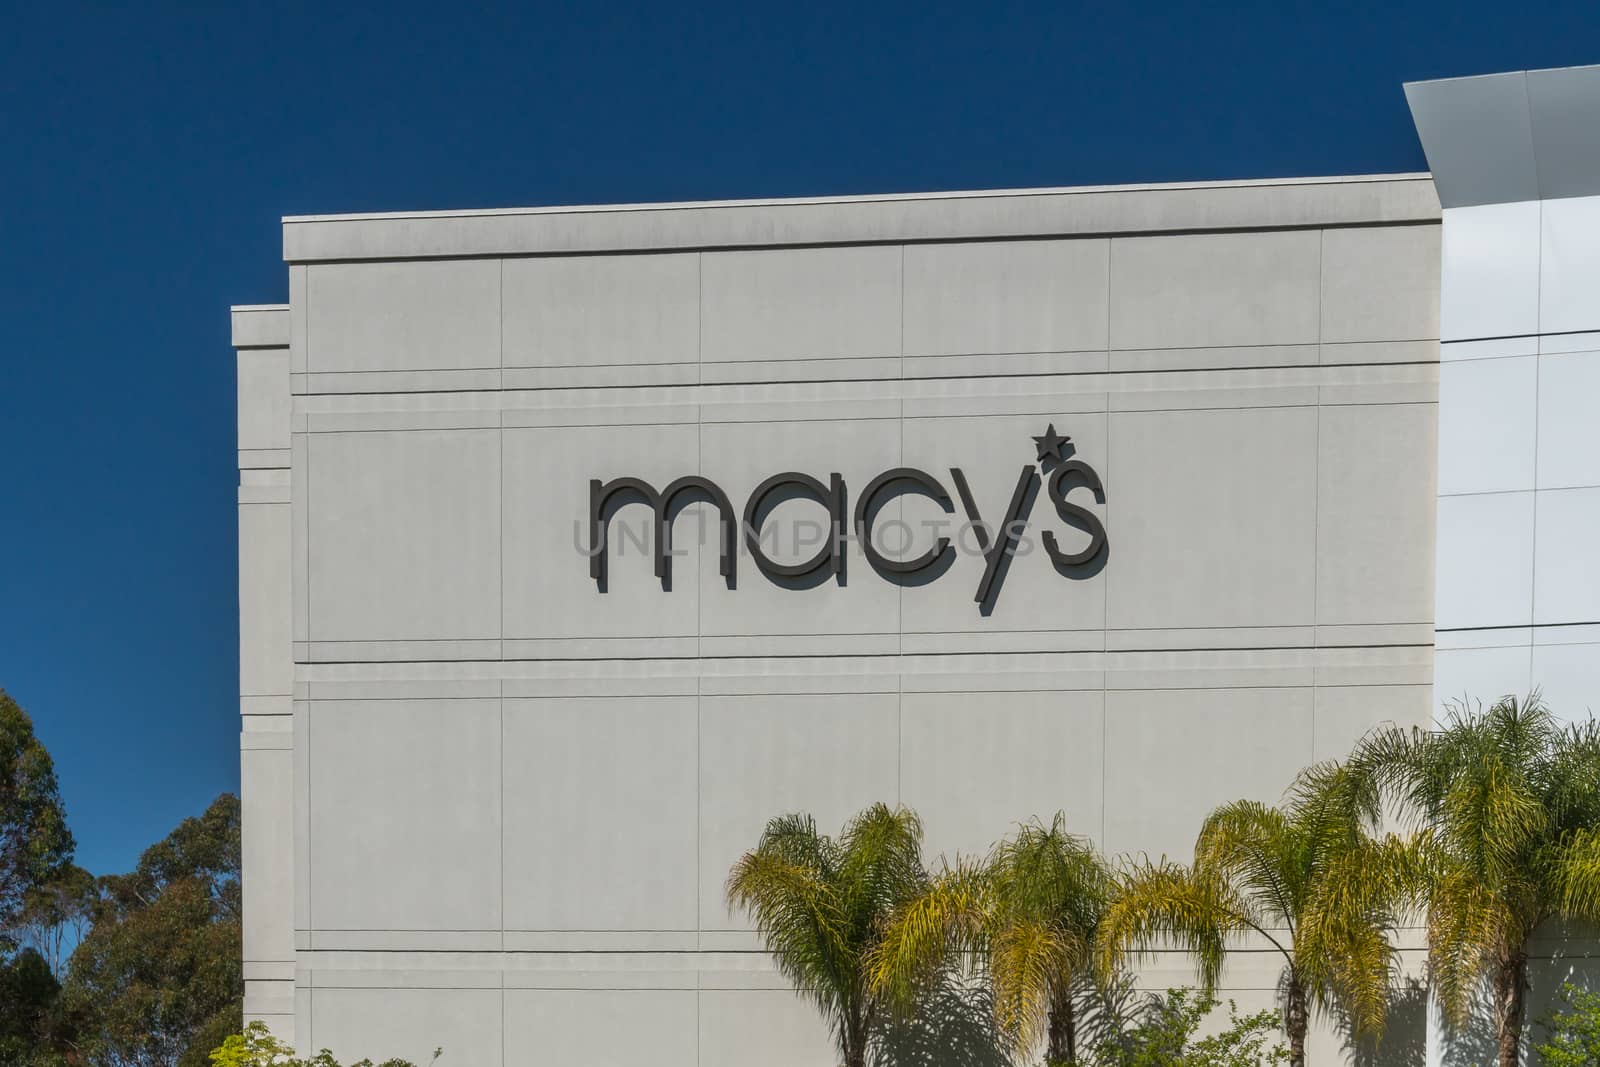 MISSION VIEJO, CA/USA - APRIL 2, 2016: Macy's department store exterior and logo. Macy's is a department store chain in the United States.